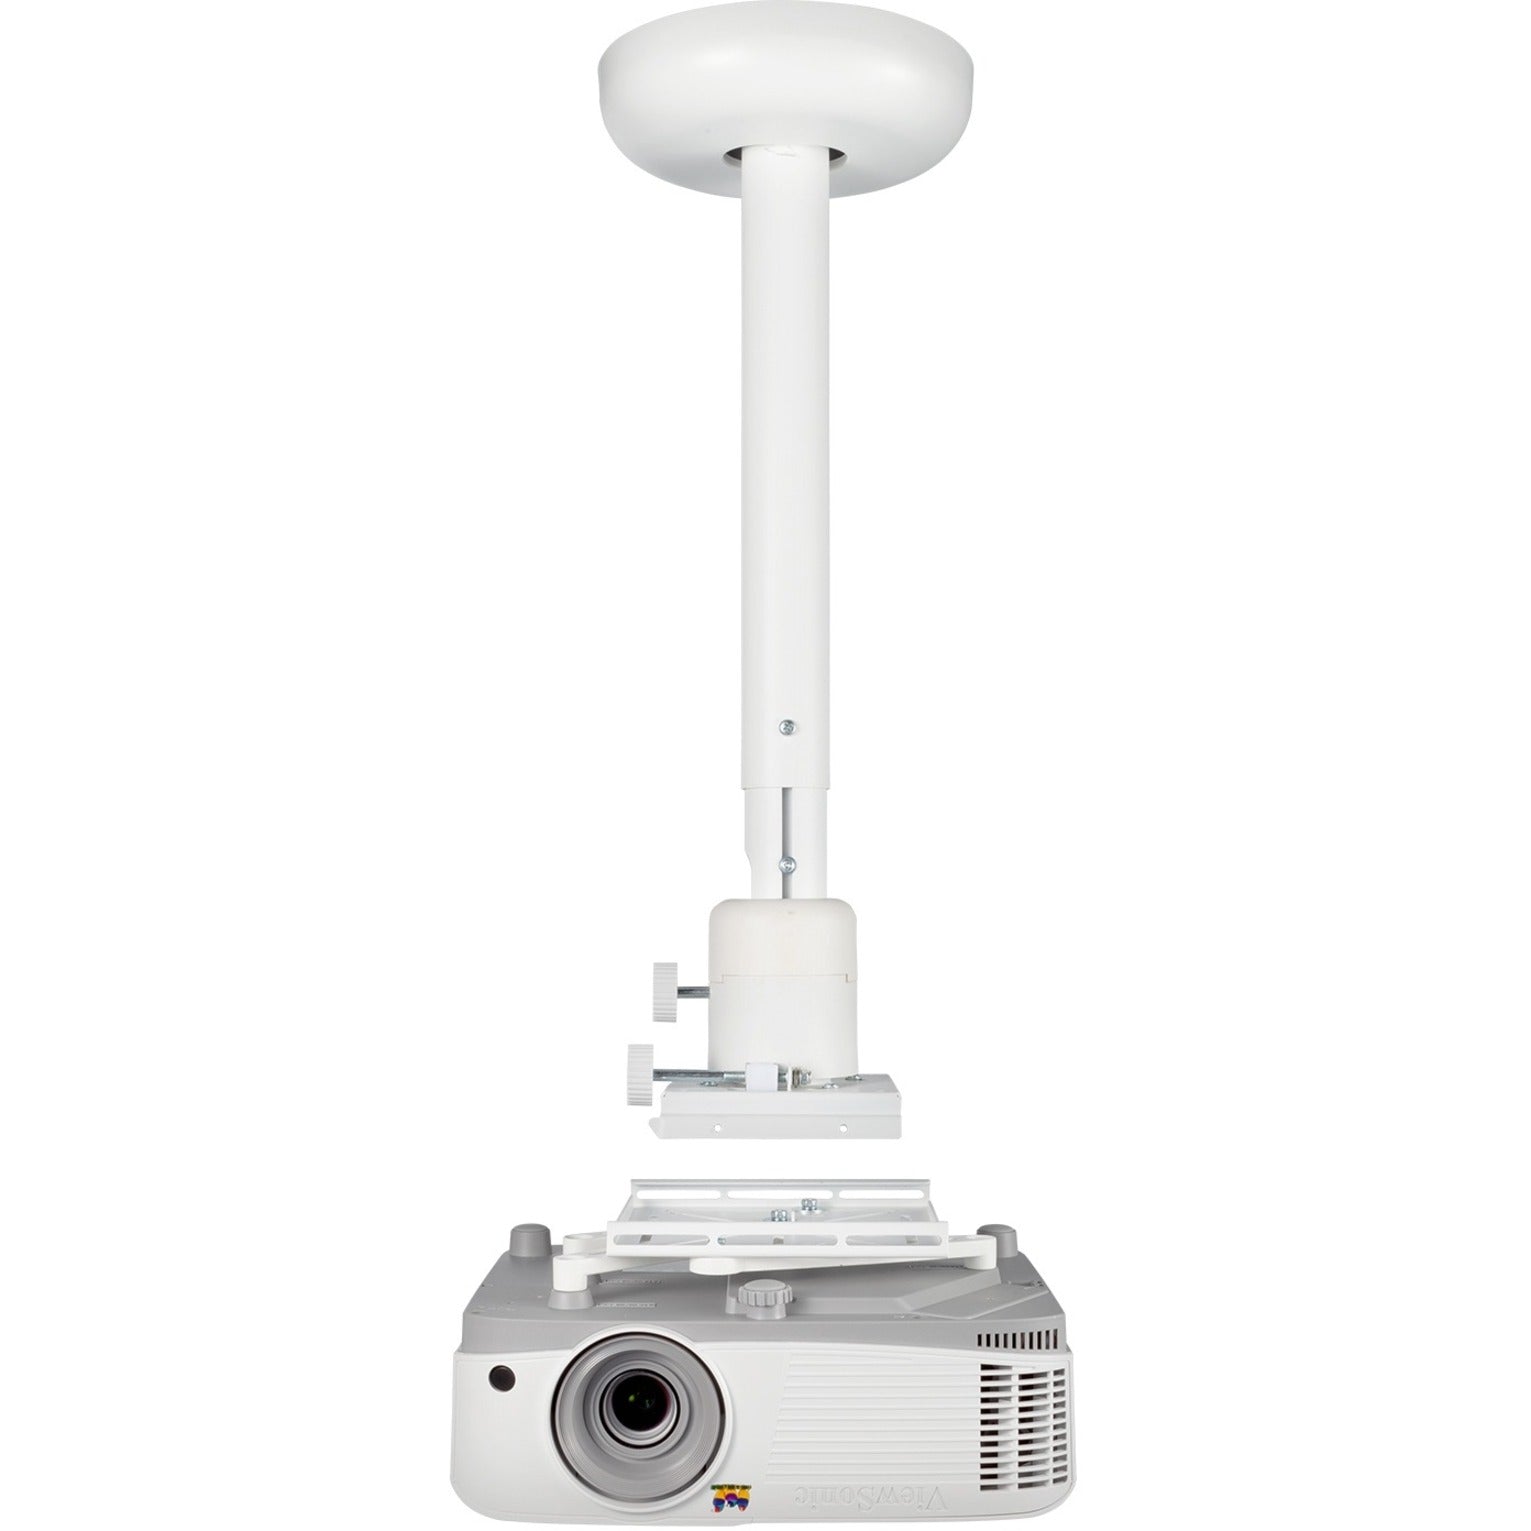 ViewSonic PJ-WMK-007 Ceiling Mount for Projector, White - Easy Installation and Secure Mounting